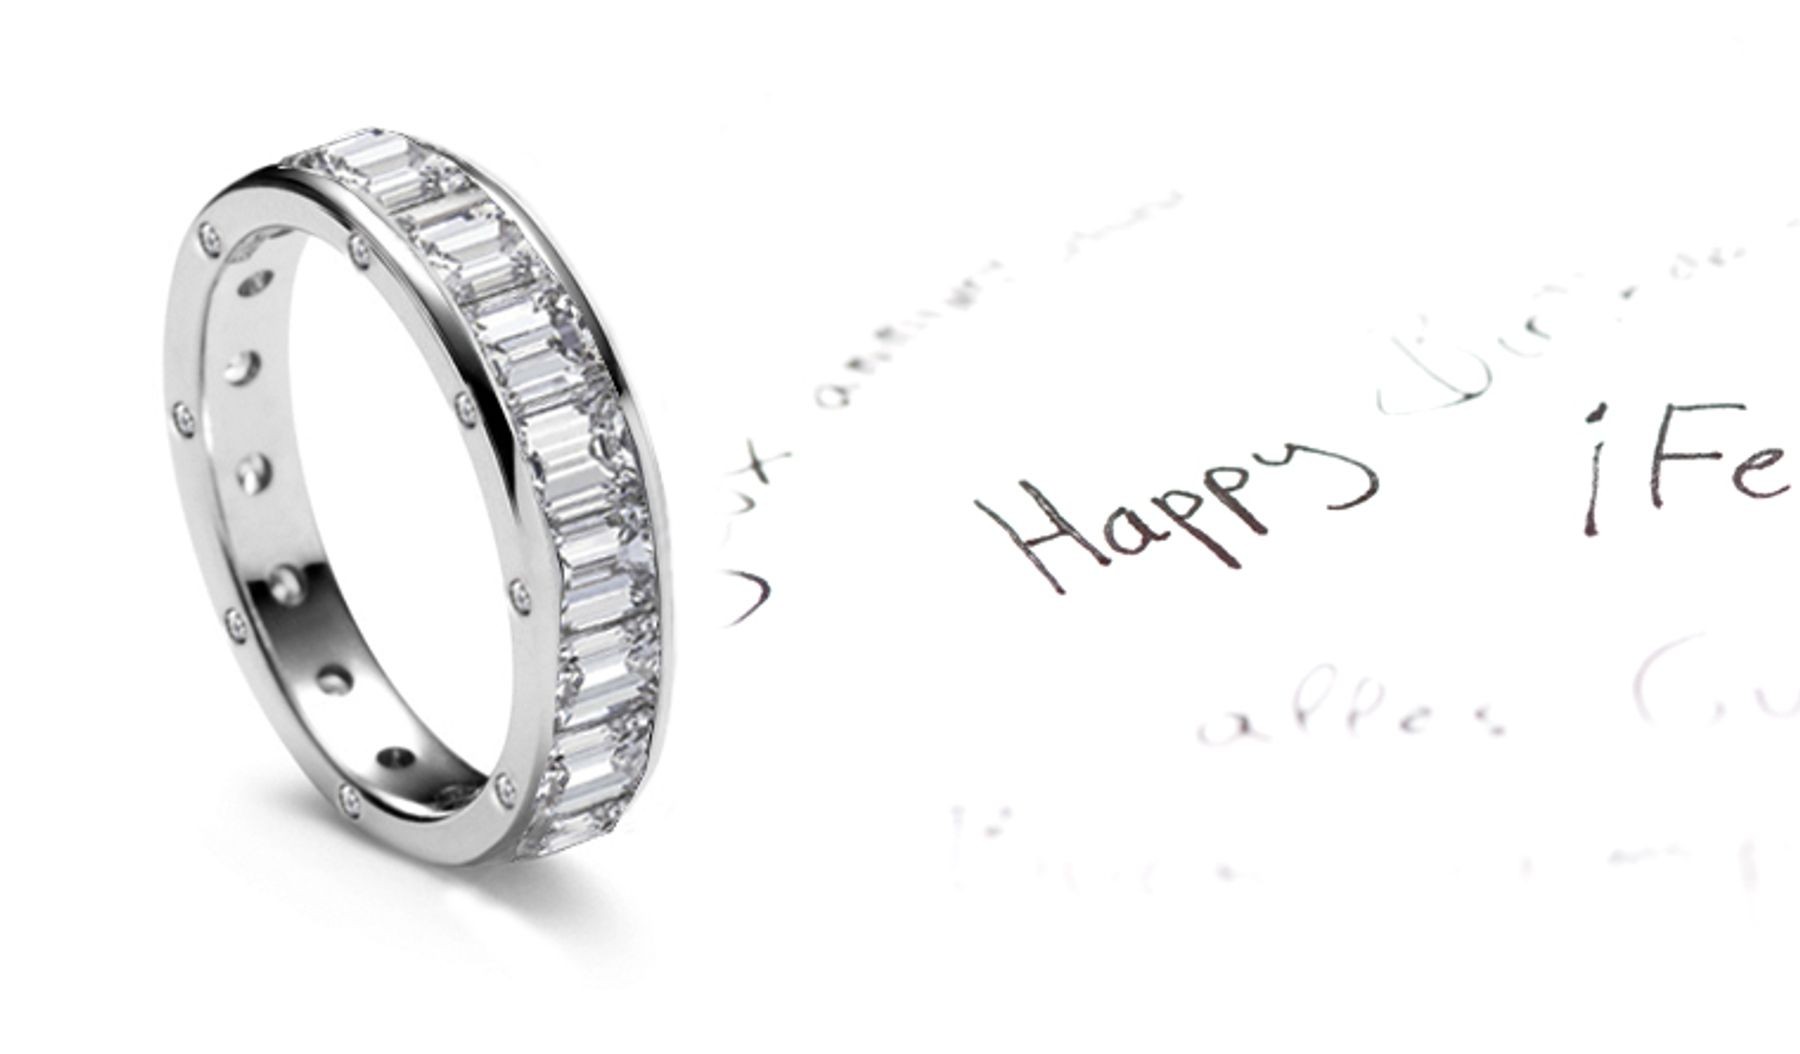 Impeccable: Emerald Cut Diamonds Cover The Entire Band & Sides Sprinkled in Diamonds